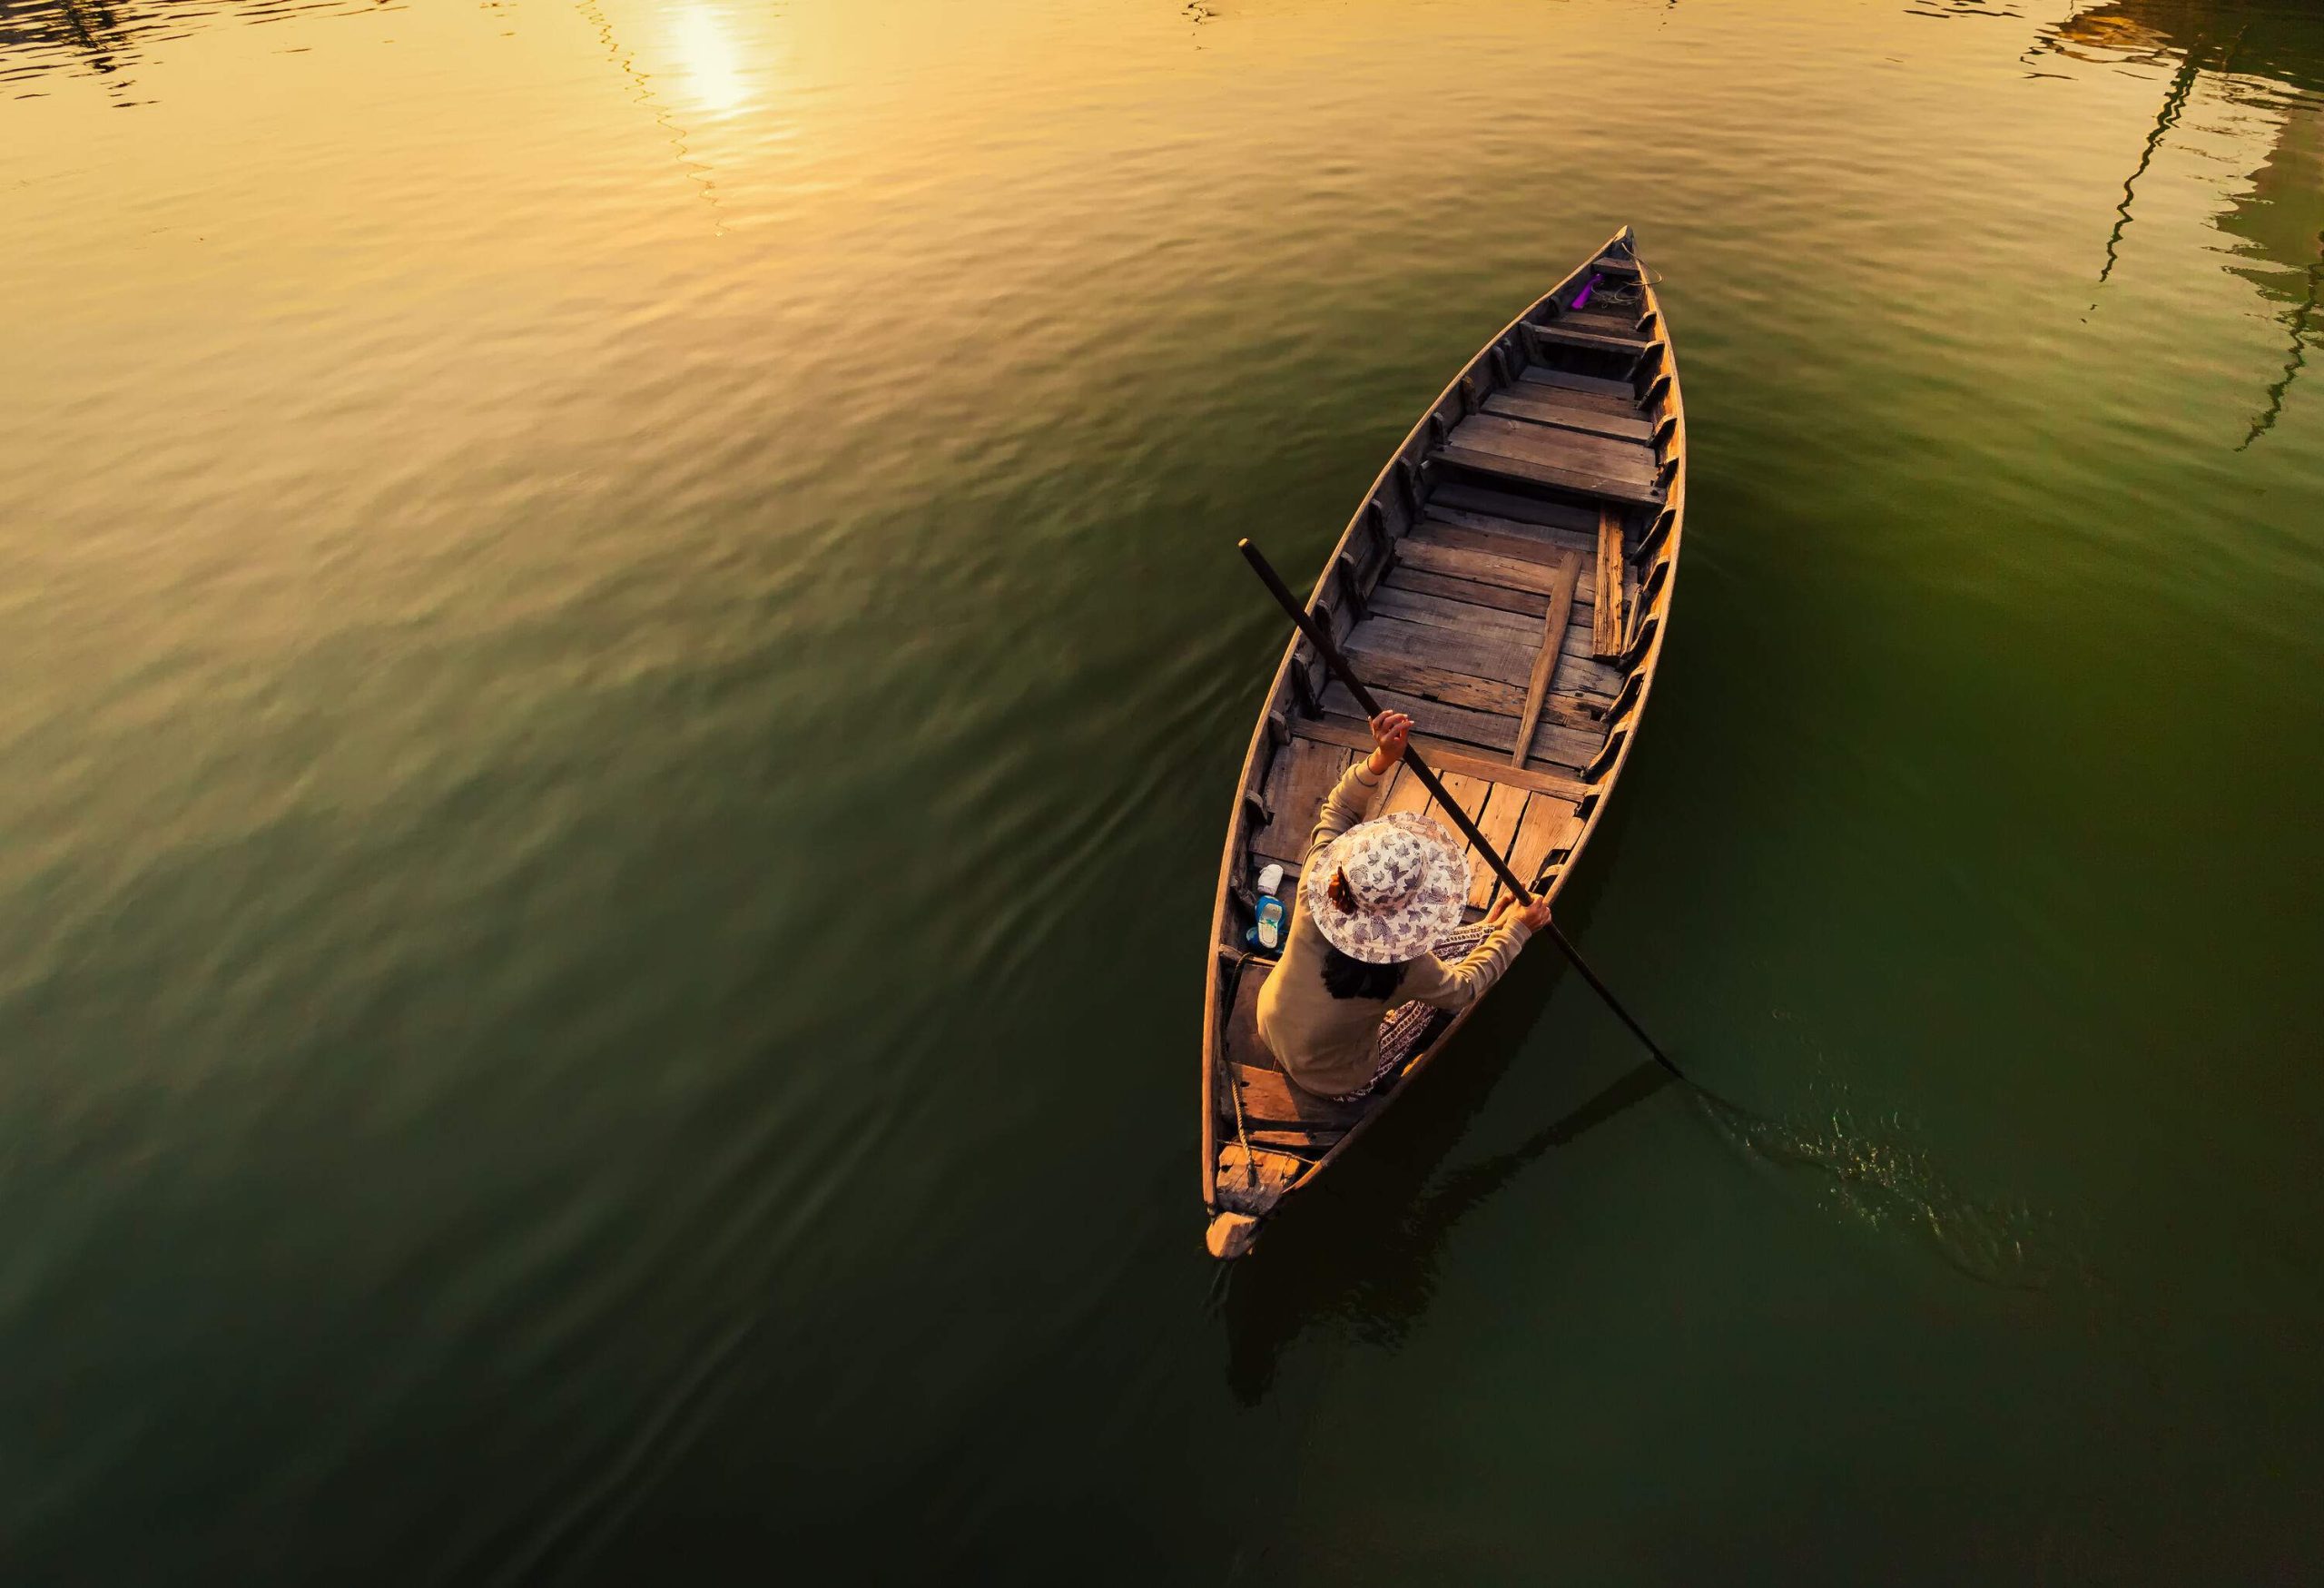 An individual on a wooden boat, paddling on tranquil waters at twilight.